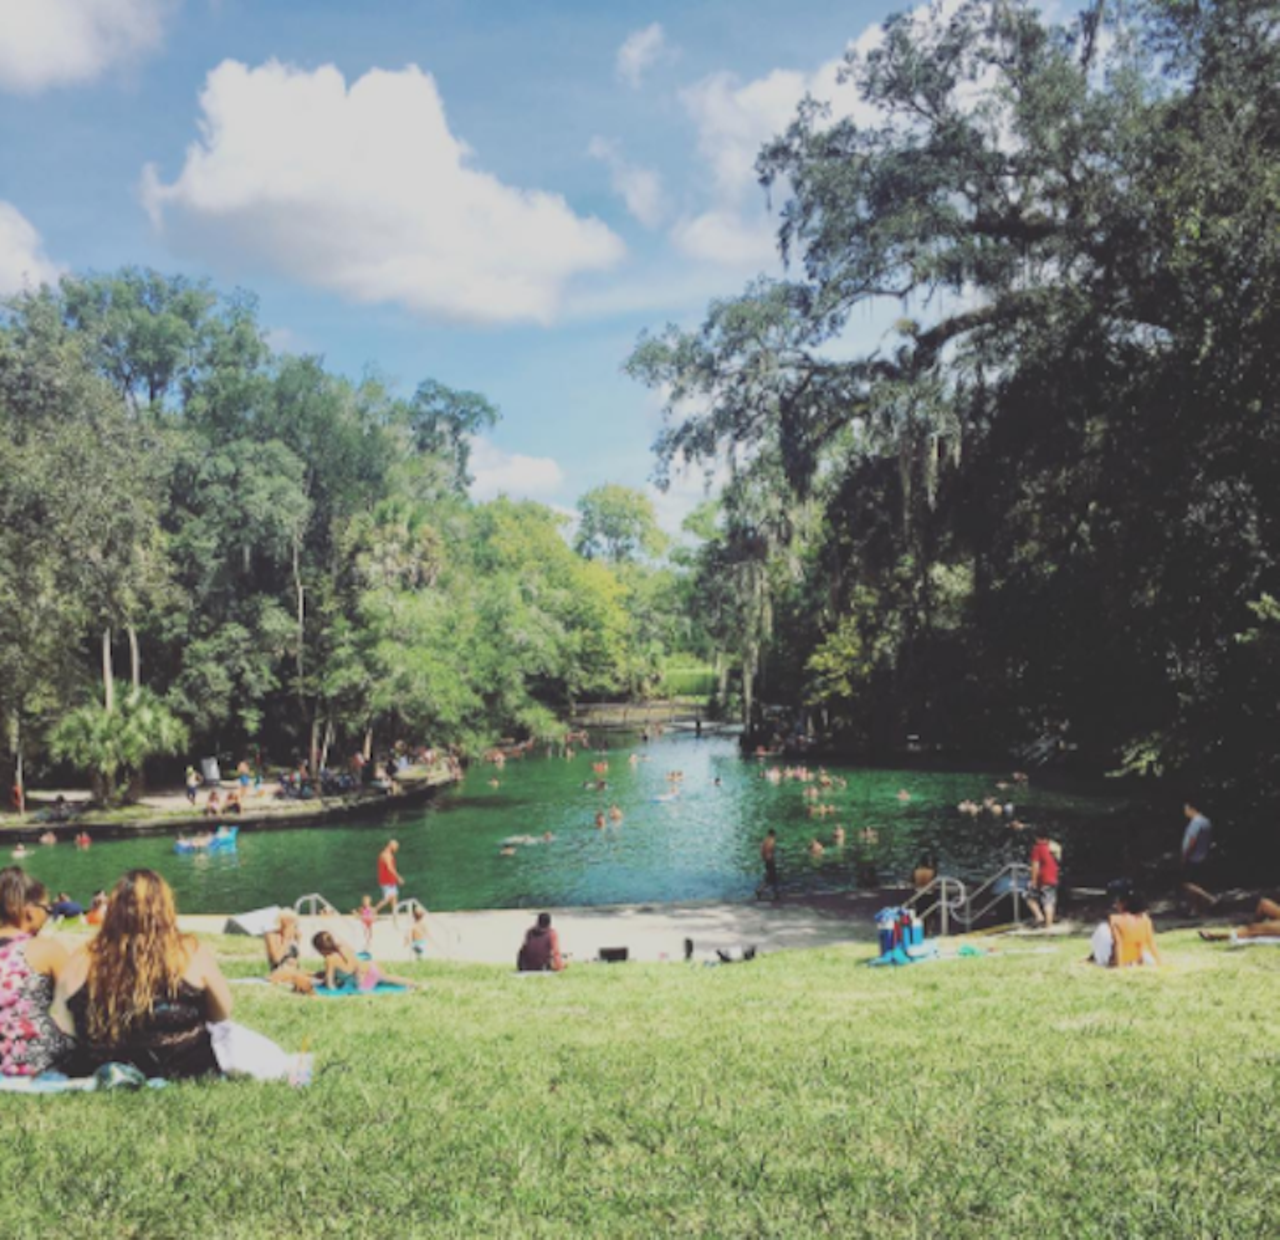 Wekiwa Springs State Park
Distance from Orlando: 30 minutes
Old hunting cabins at this park have been turned into &#147;primitive camping sites.&#148; Fun activities include kayaking, horseback riding and hiking. If you get lucky, you can catch a glimpse of a bear cub at rest from a distance.
Photo via sha_rivera_barrett/Instagram